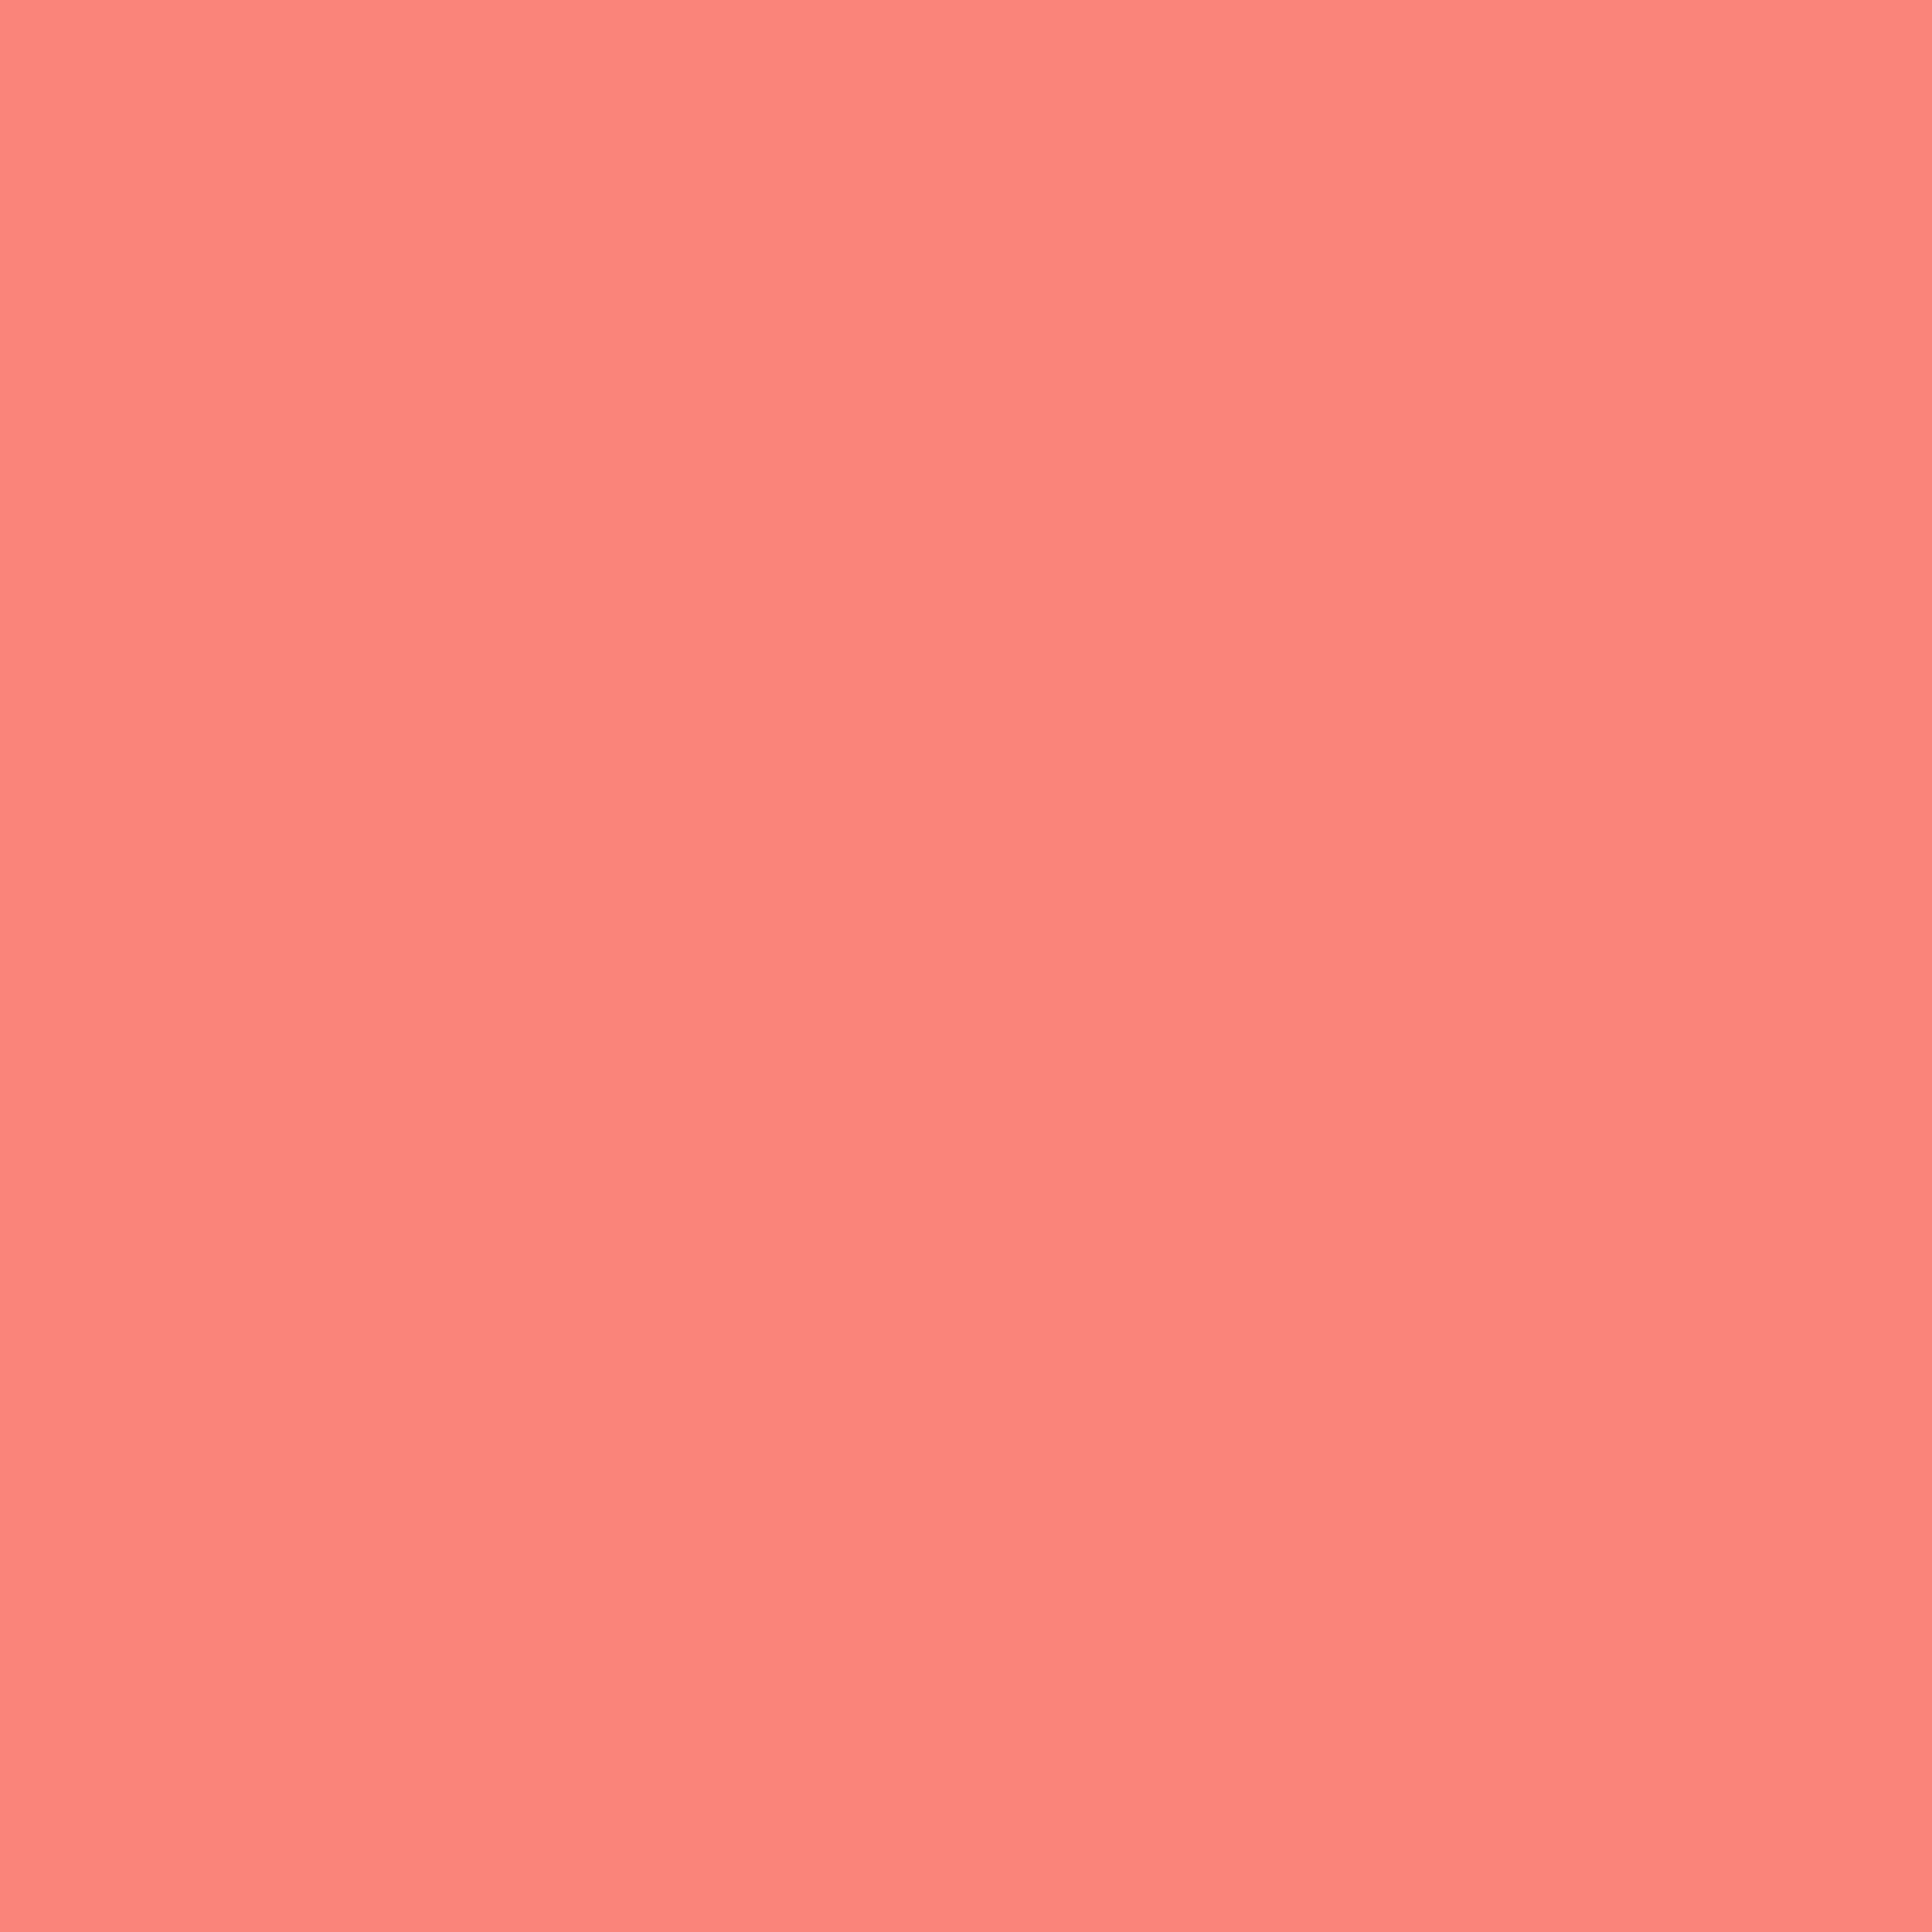 3600x3600 Coral Pink Solid Color Background